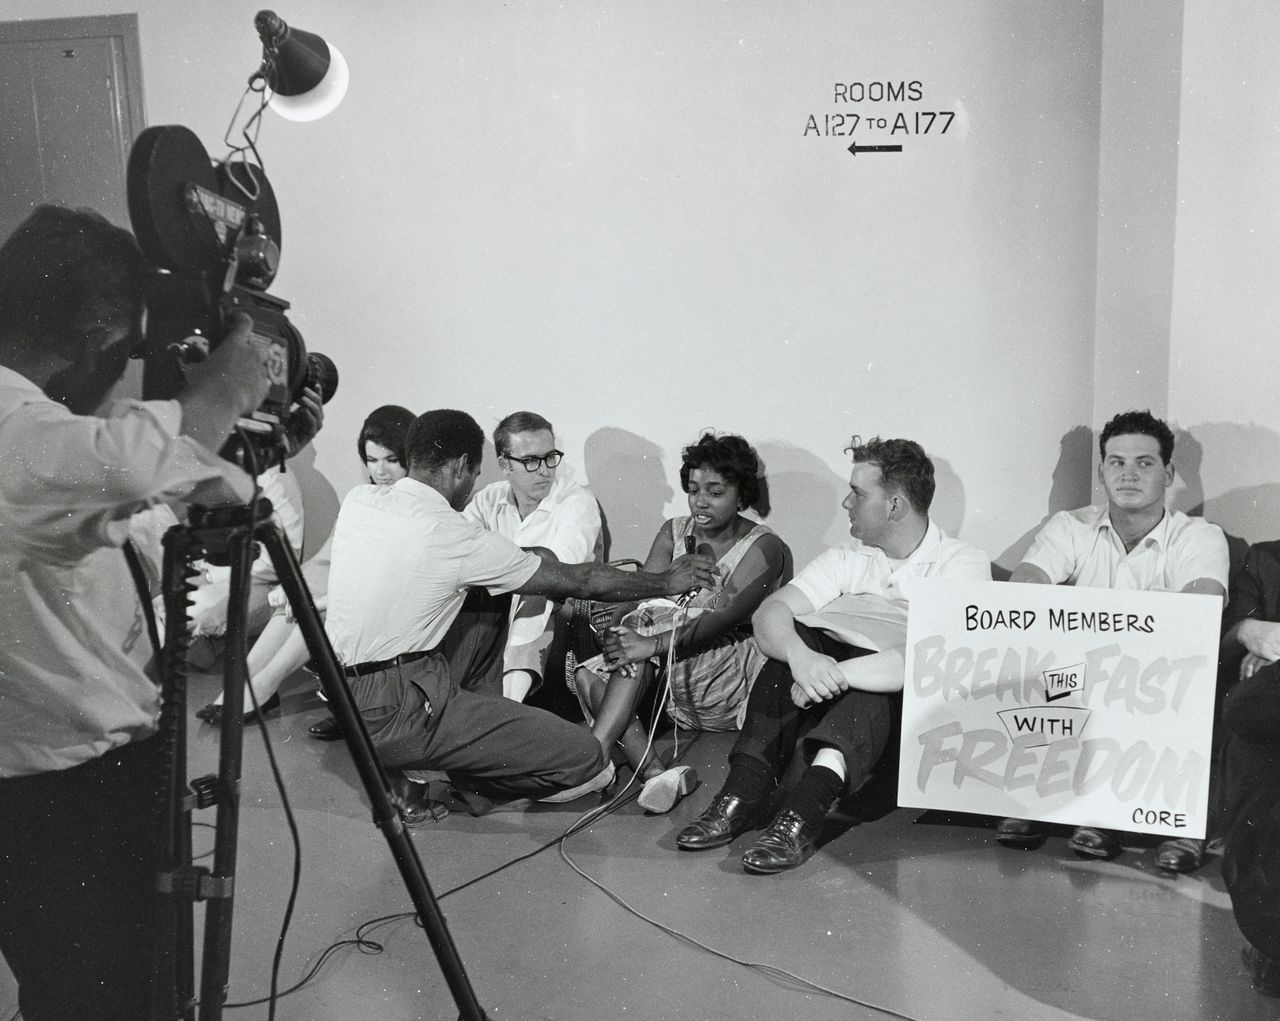 News media interviewing CORE activists waging a sit-in and hunger strike outside the Los Angeles Board of Education offices to raise awareness of segregation and inequality in the public schools.